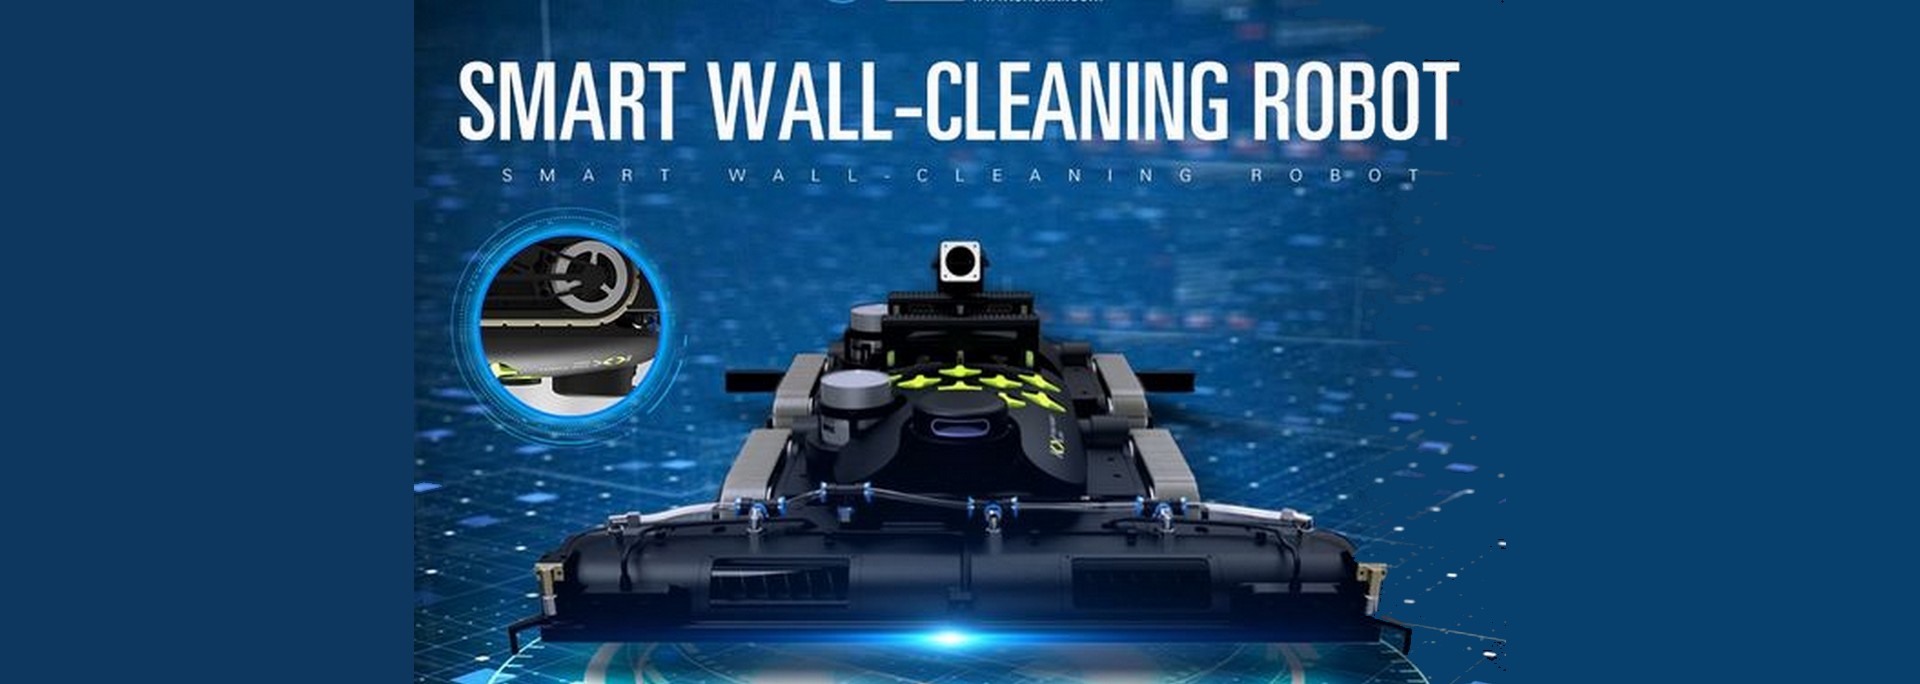 Smart wall cleaning robot